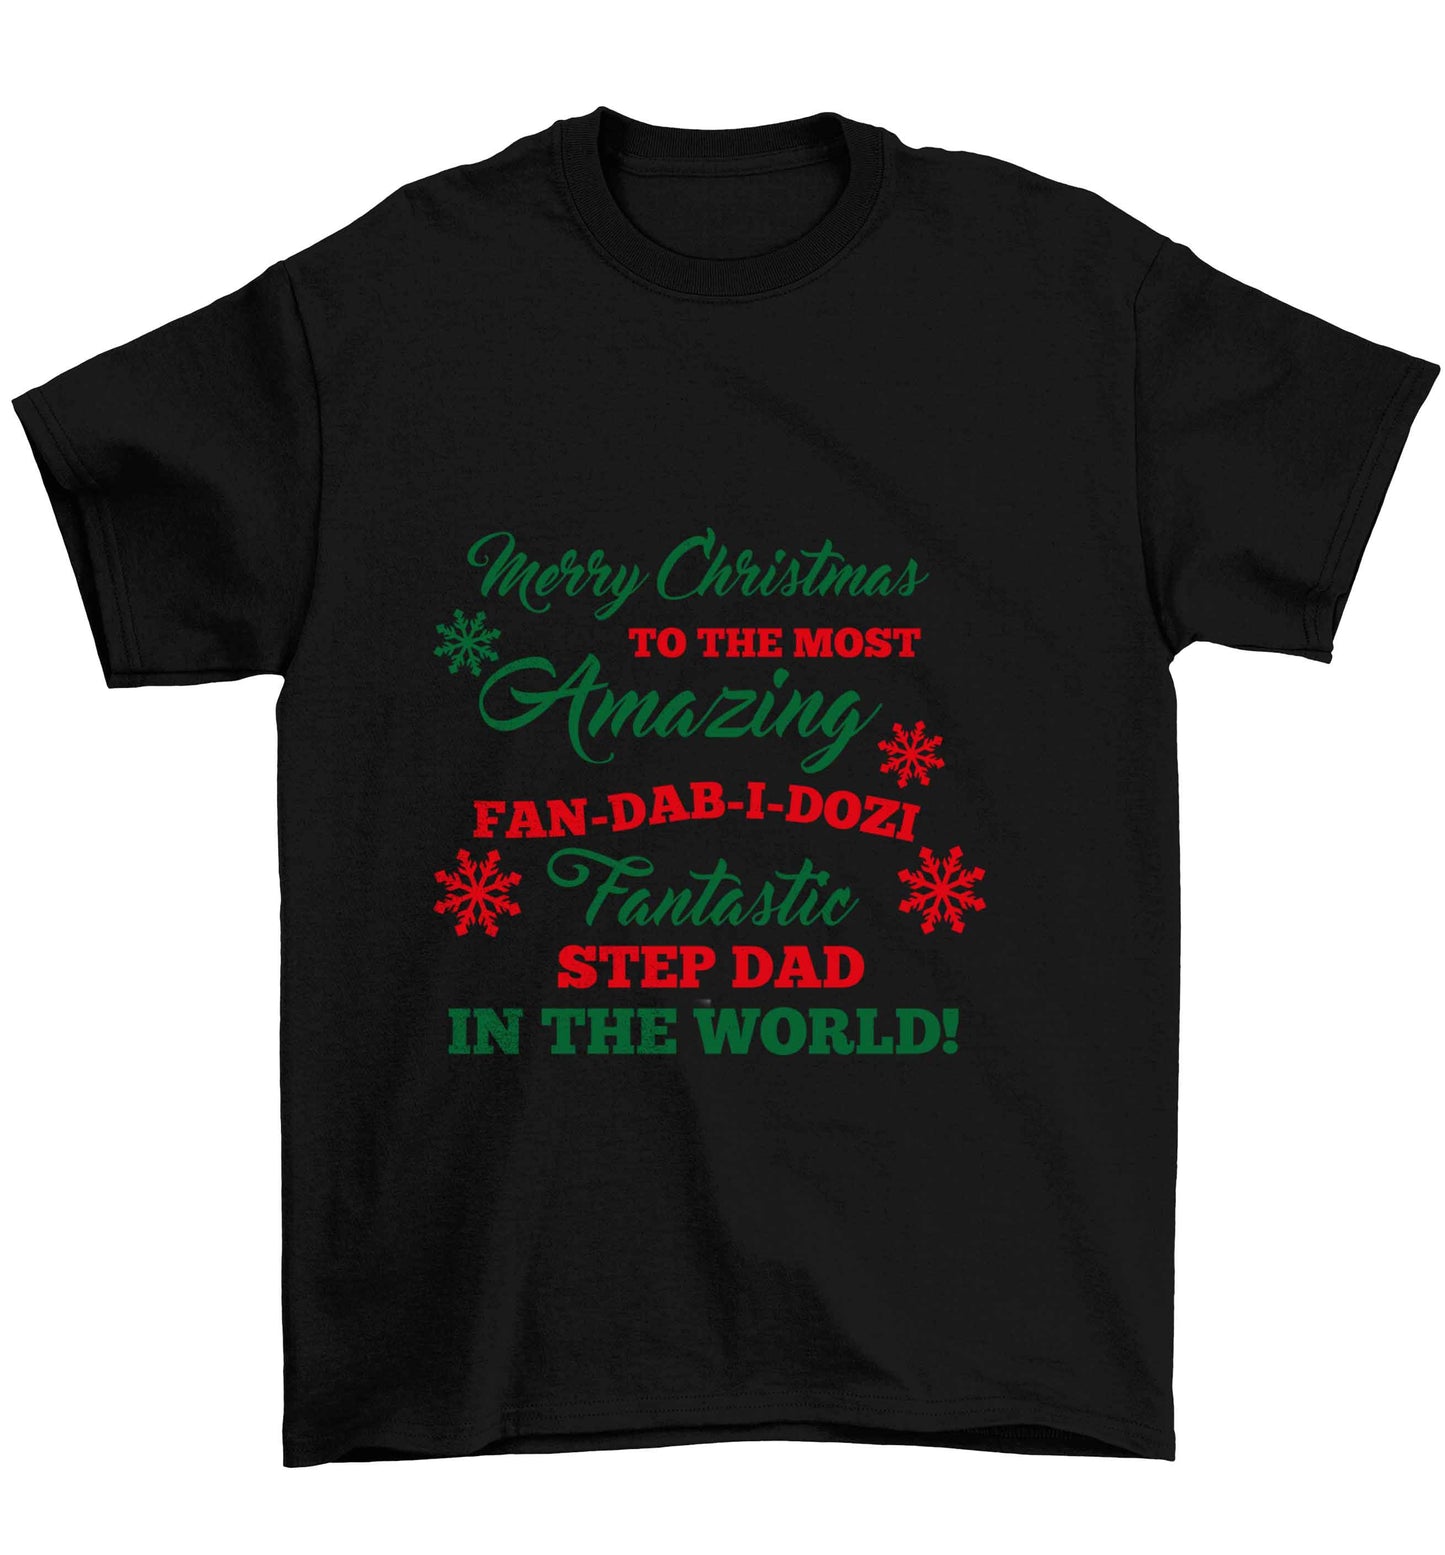 Merry Christmas to the most amazing fan-dab-i-dozi fantasic Step Dad in the world Children's black Tshirt 12-13 Years